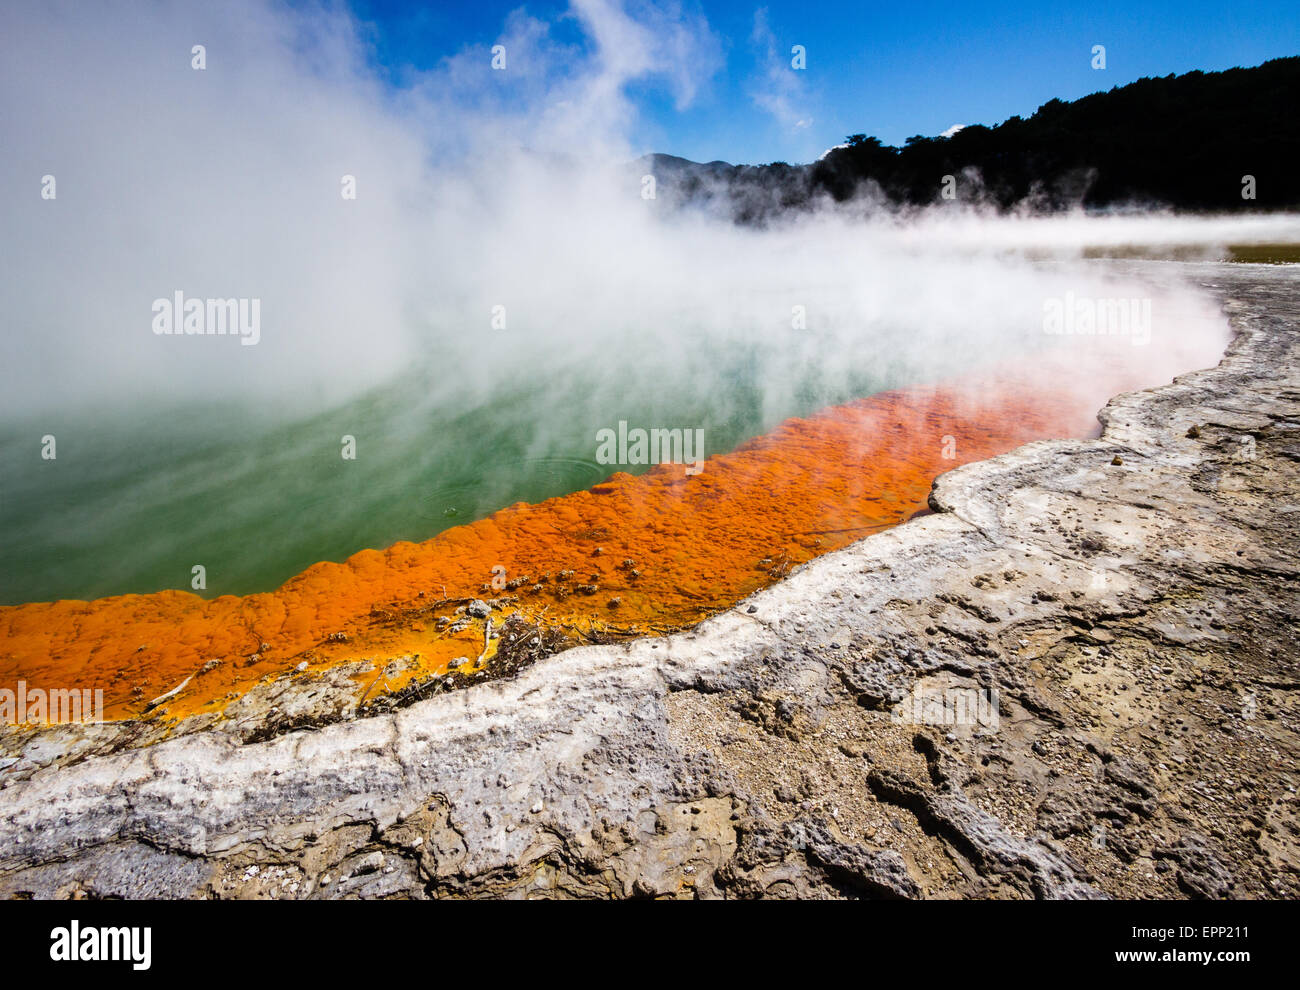 Steaming green waters of Champagne Pool with orange rim at Wai o Tapu Thermal Wonderland in North Island New Zealand Stock Photo